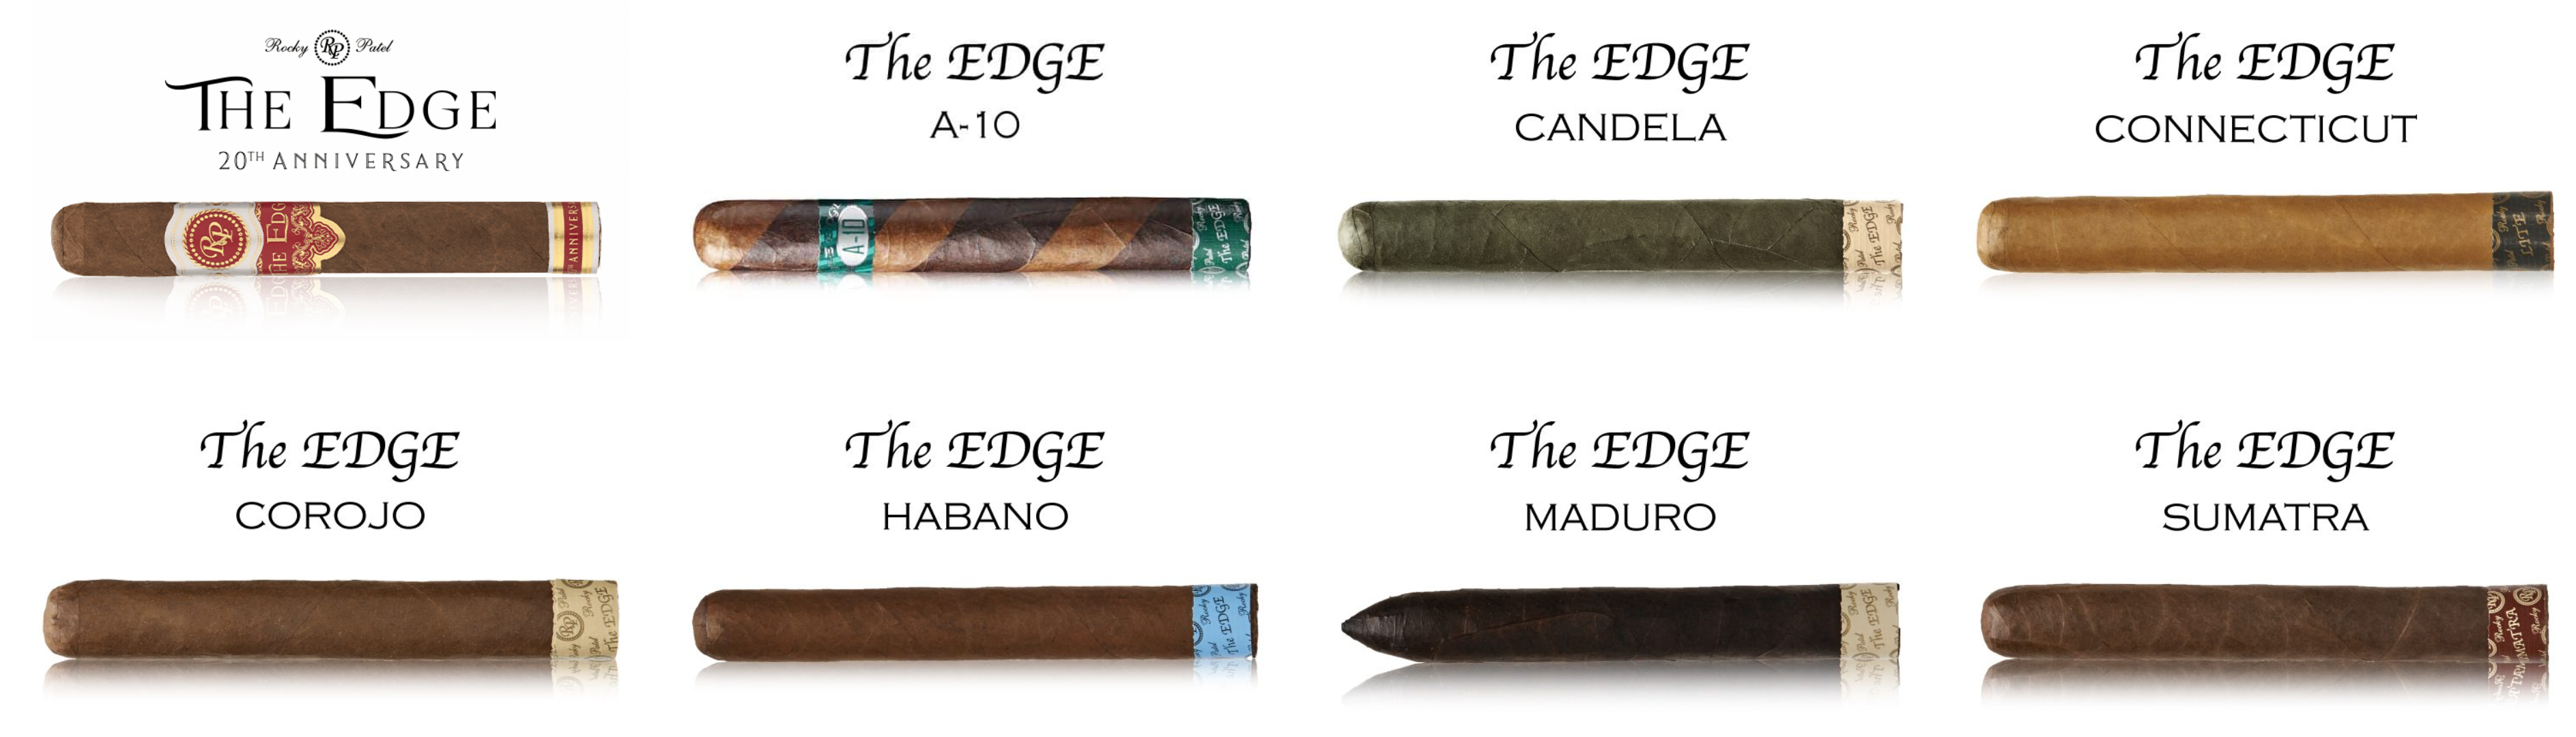  all-brands rocky-patel-cigars the edge